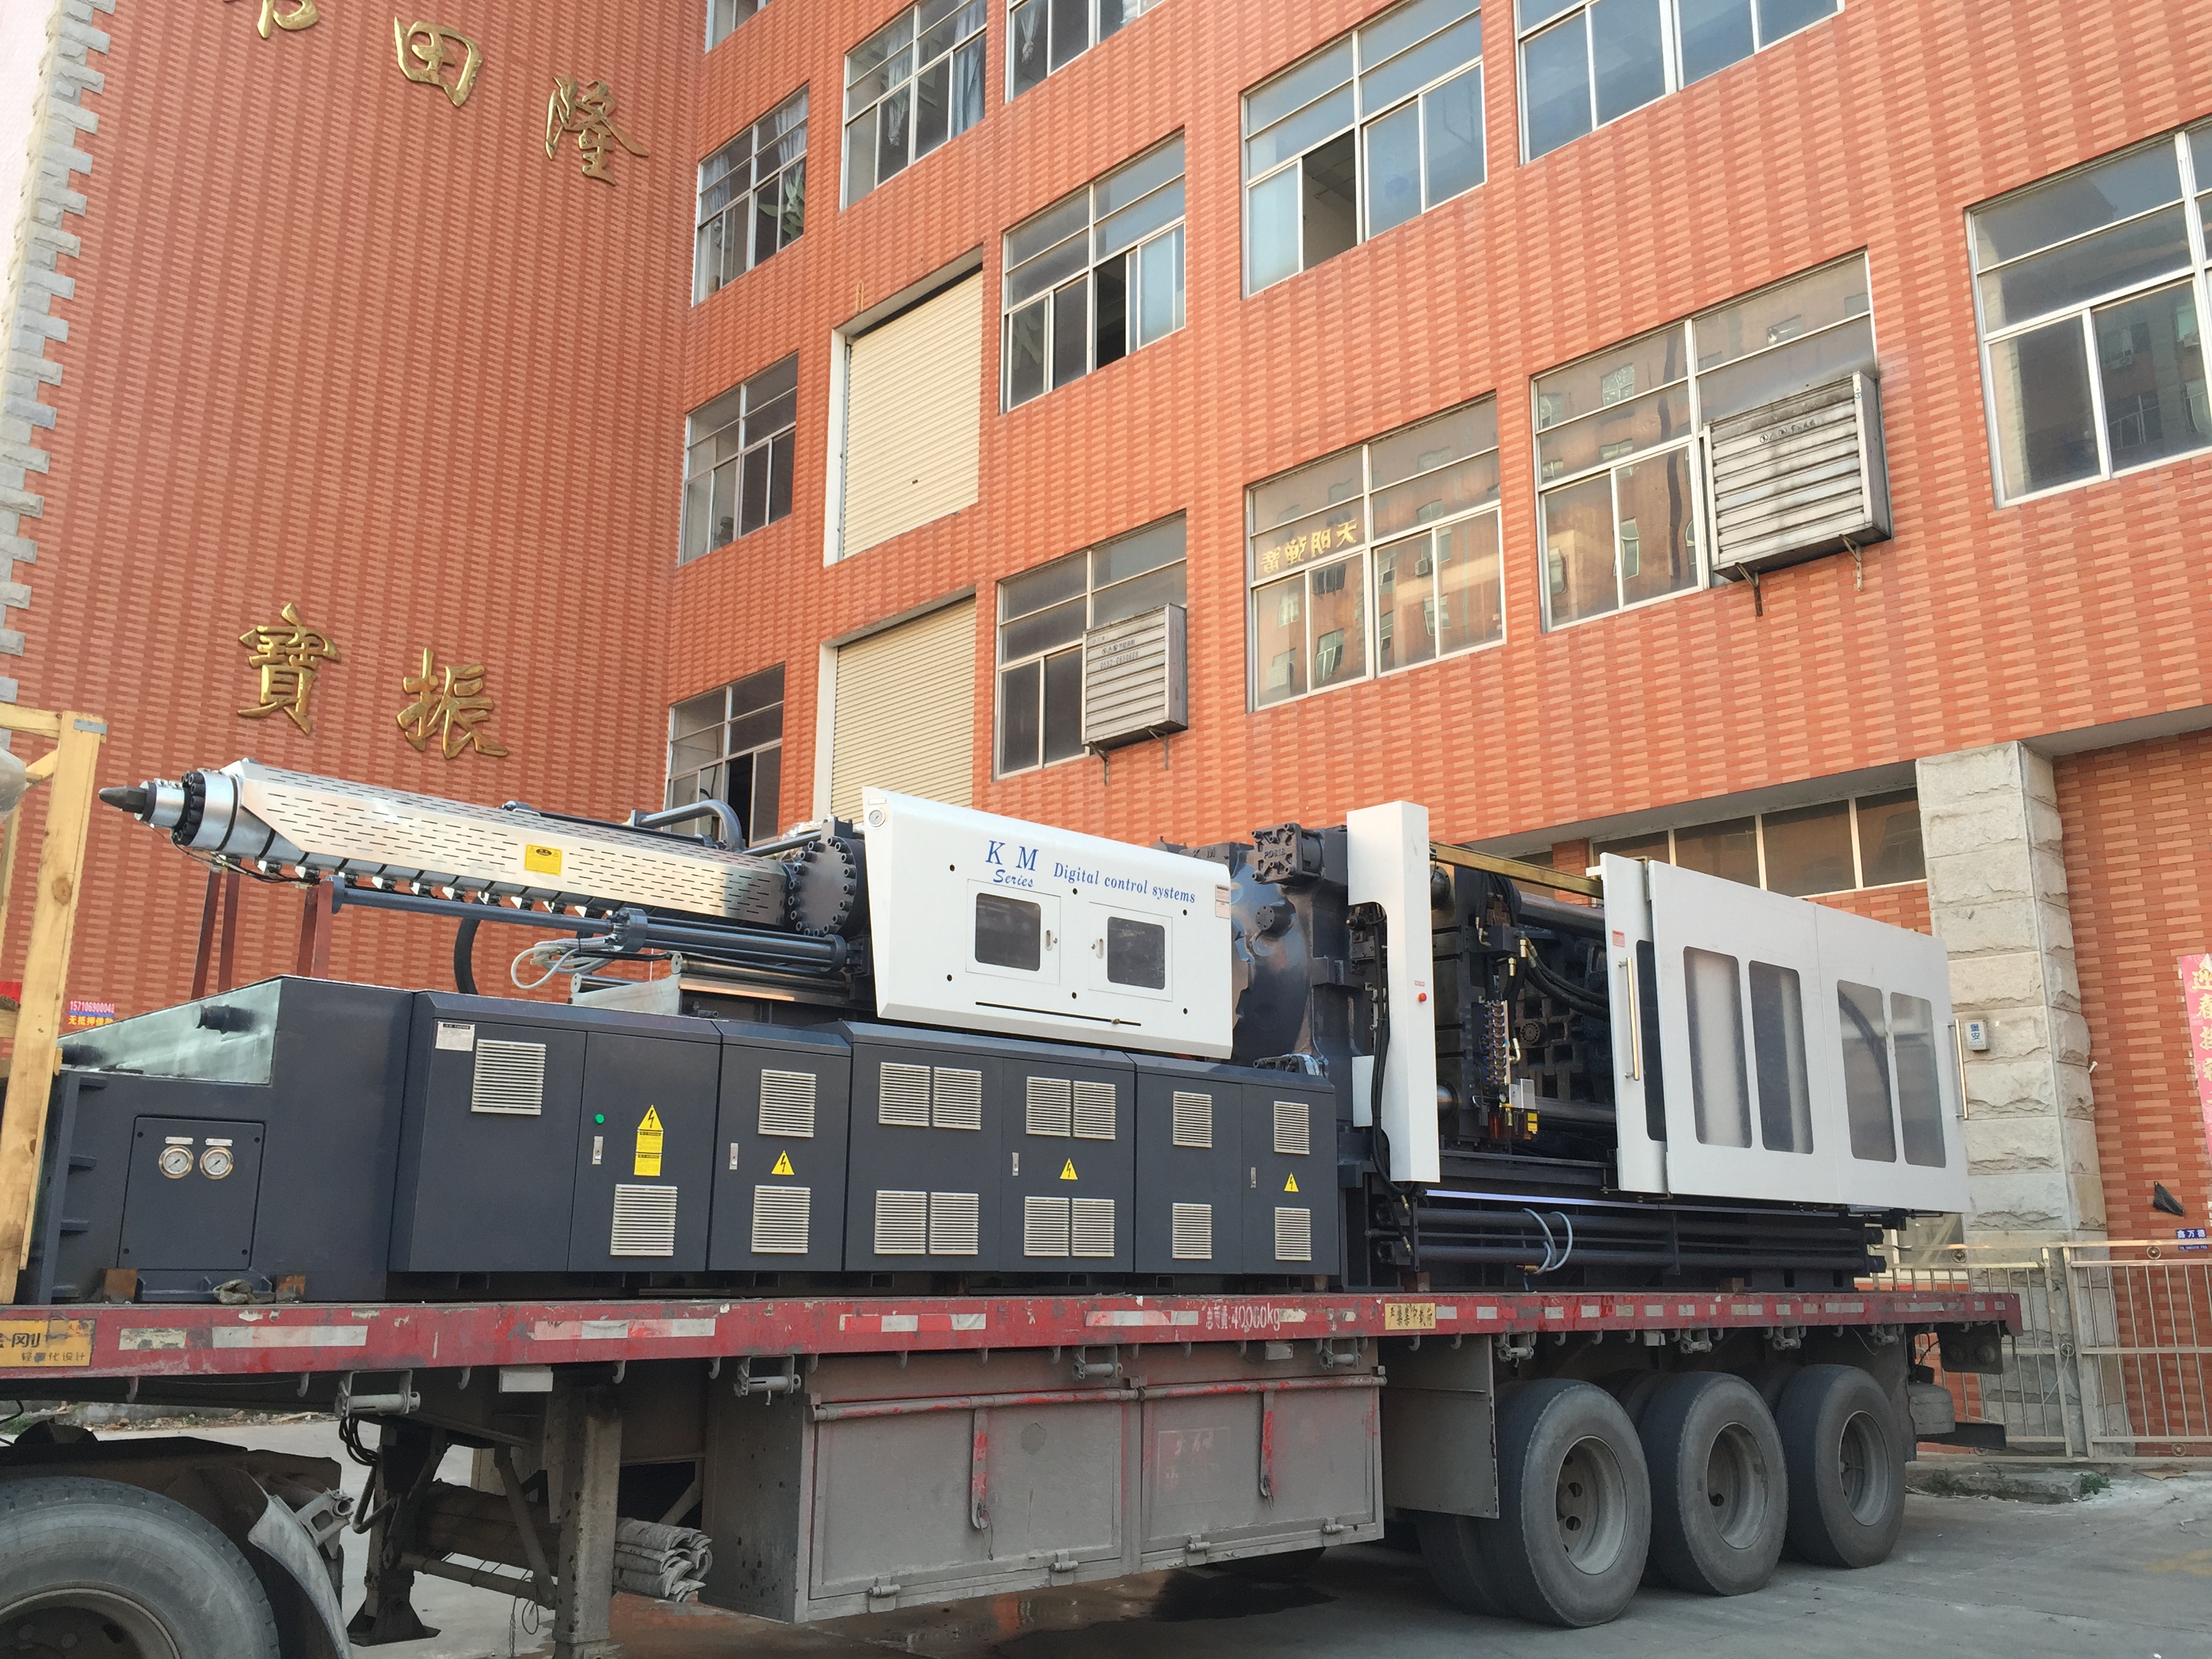 Leiyuan Purchase New Injection Molding Machine for Rainwater Harvesting Module Production